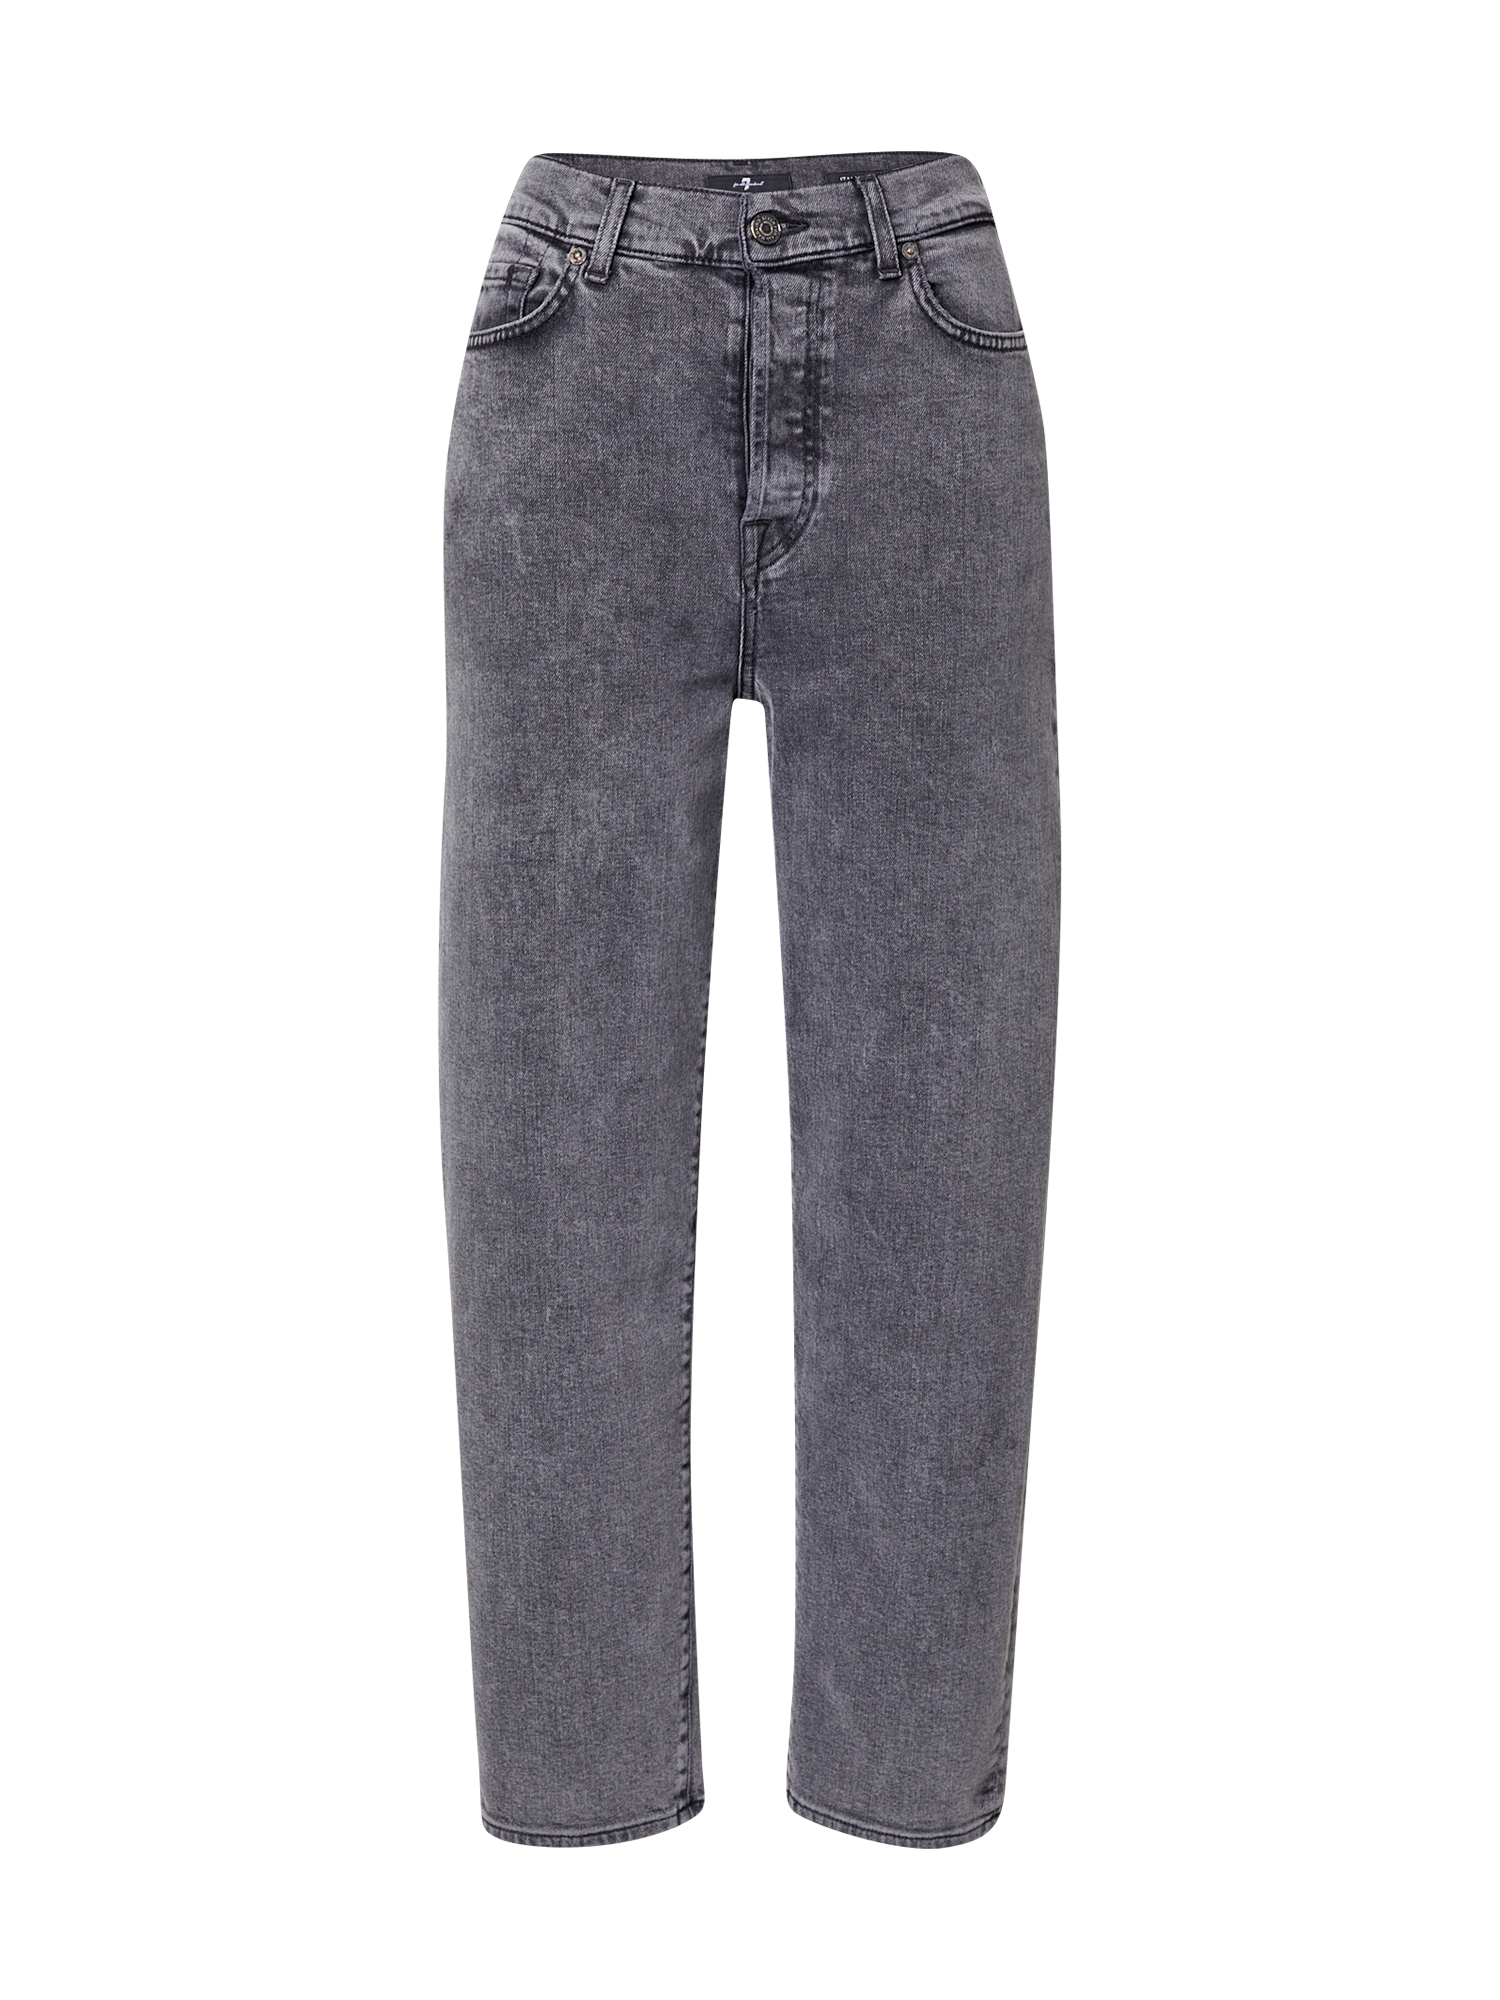 Premium PROMO 7 for all mankind Jeans Dylan in Grigio 